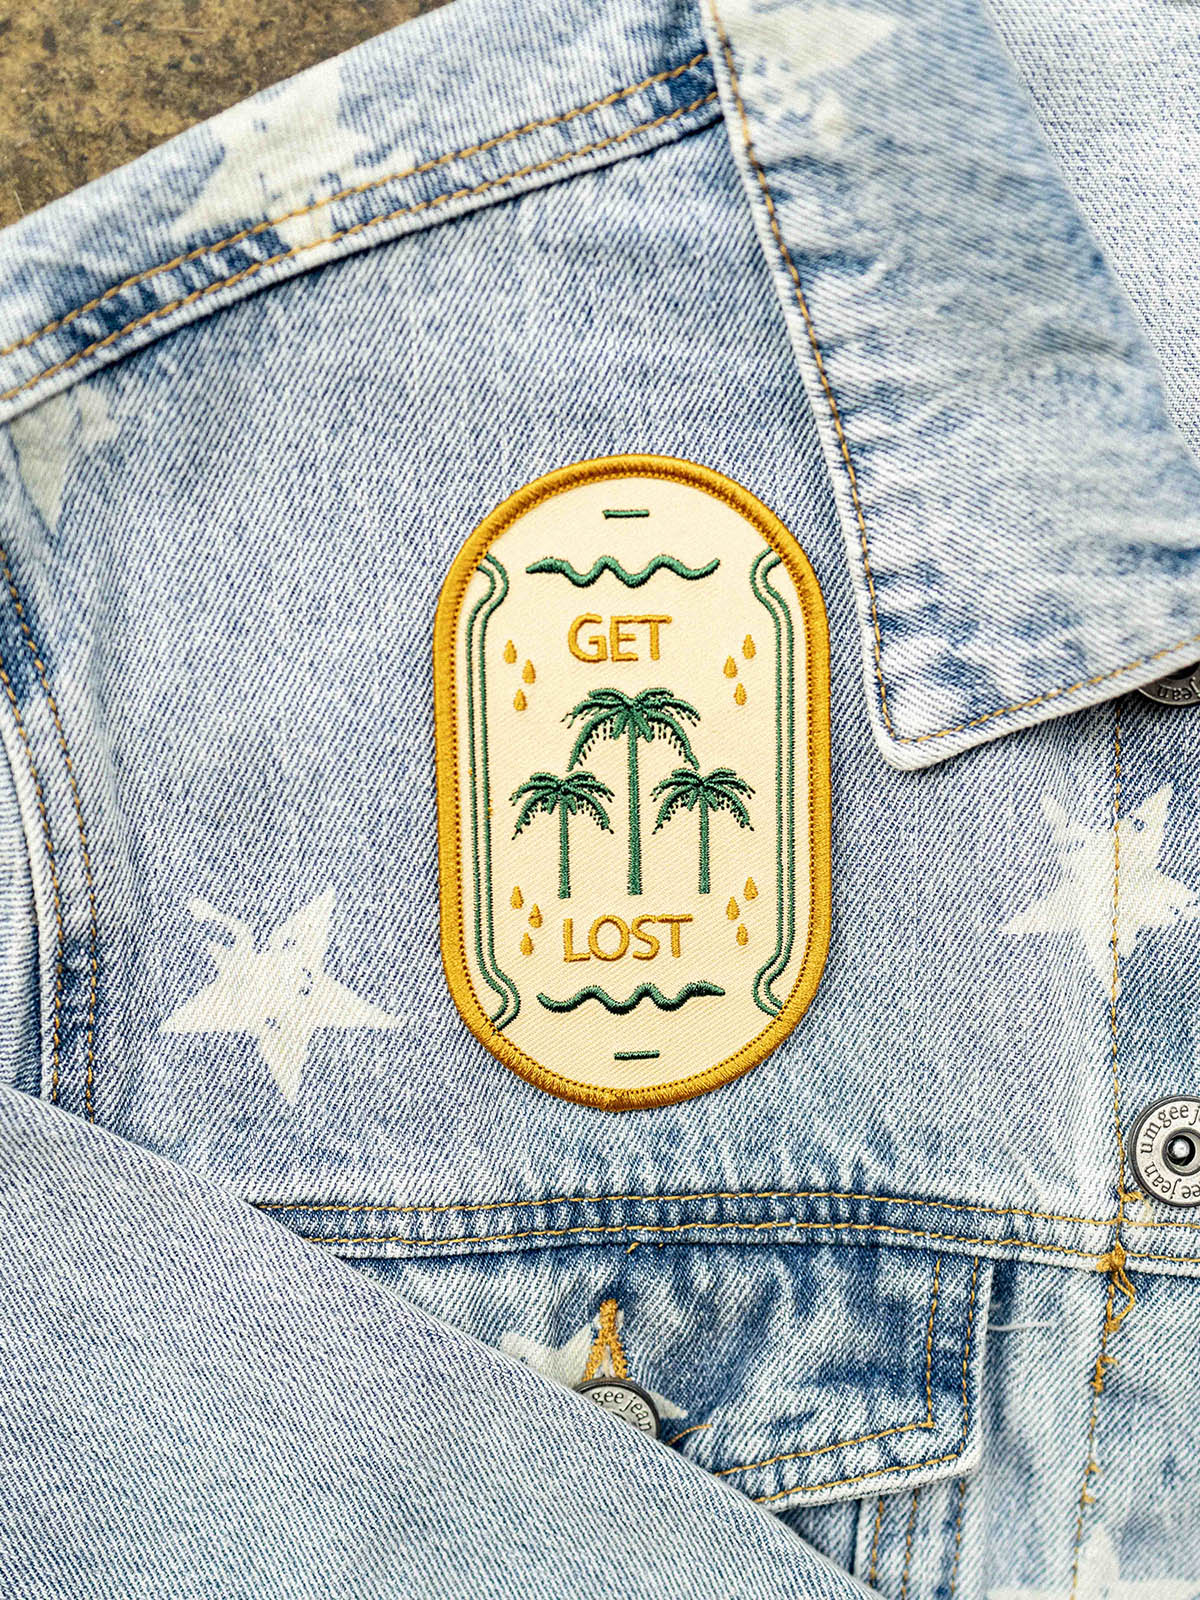 Get Lost Patch